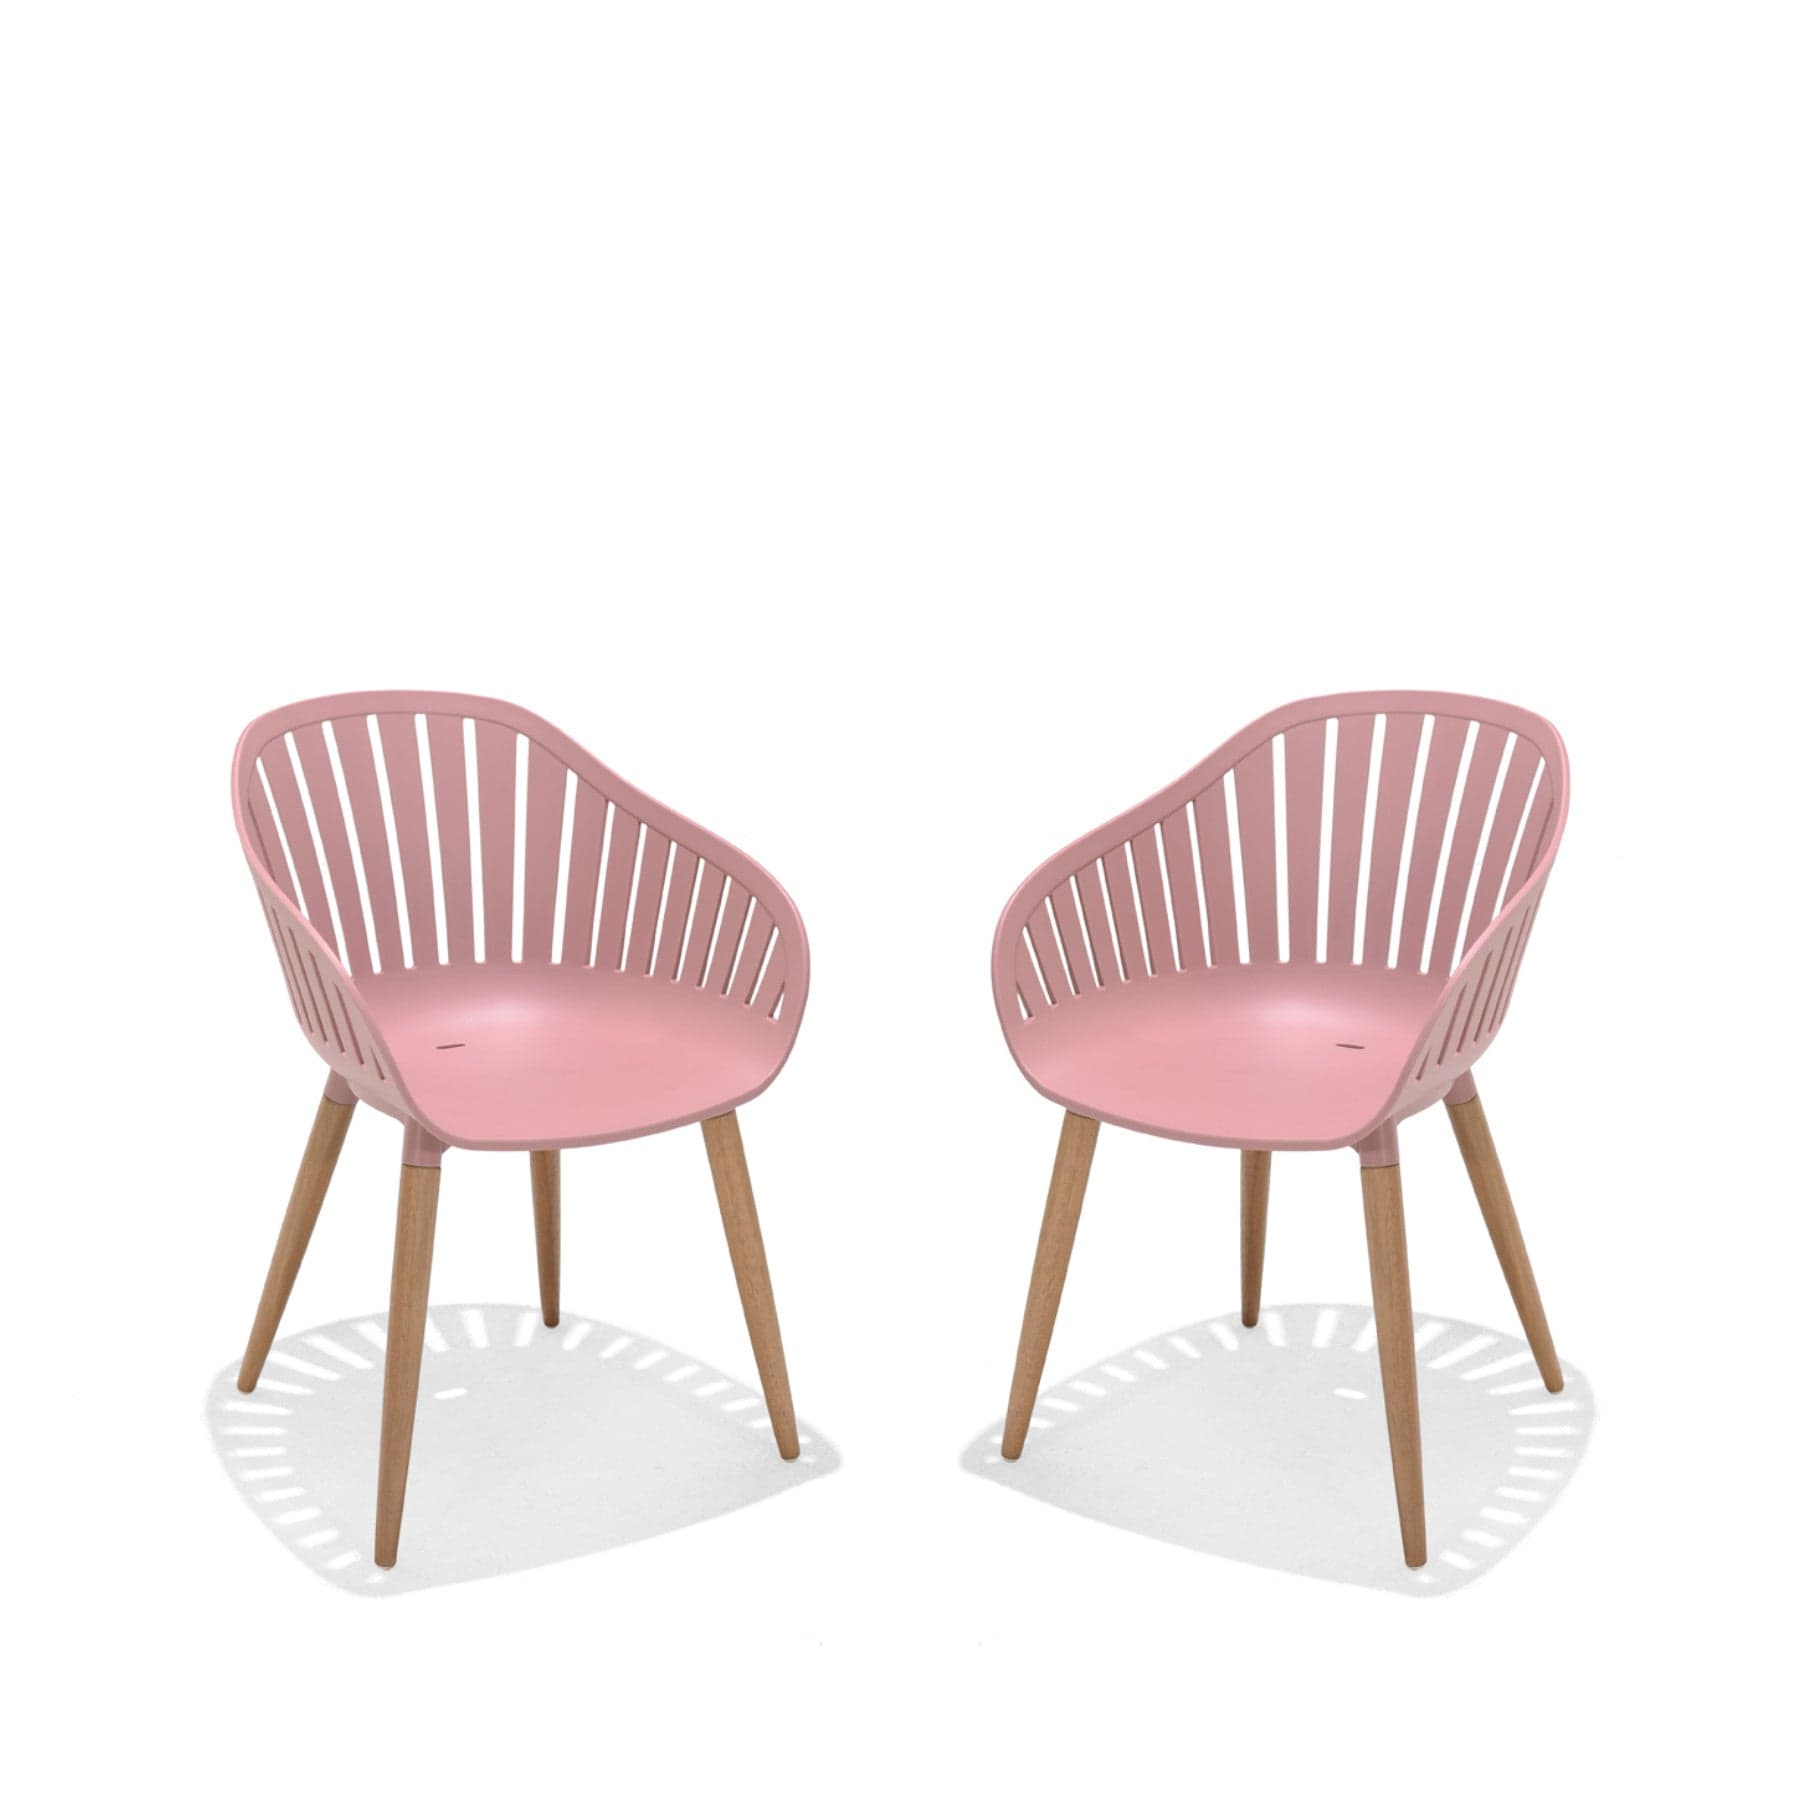 Two modern pink dining chairs with wooden legs on a white background